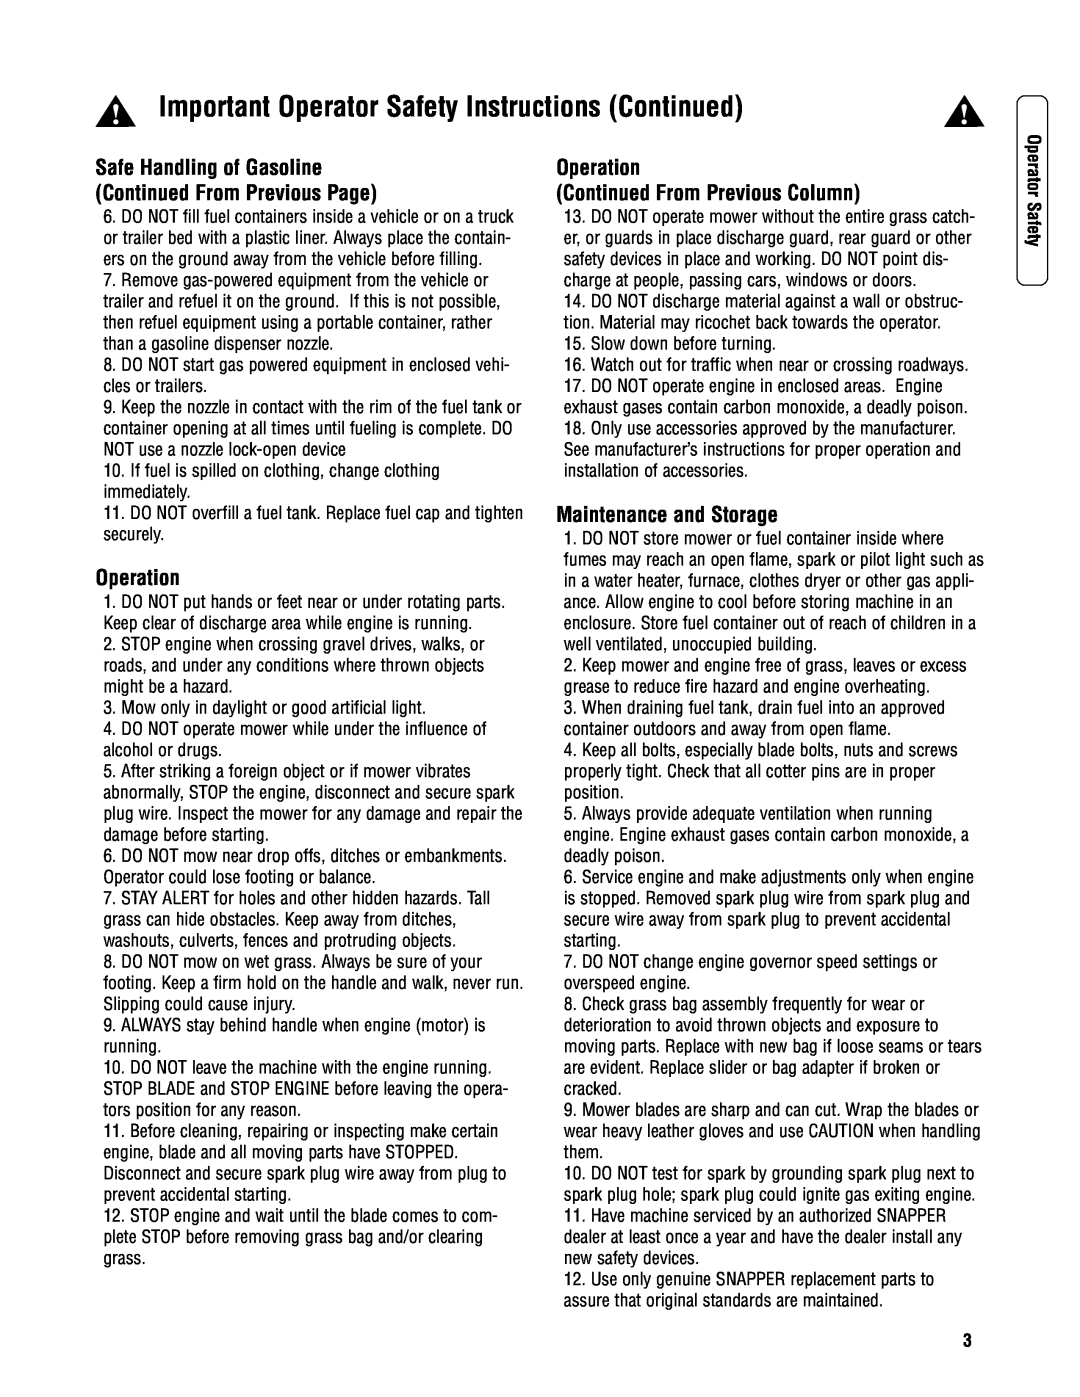 Snapper N2167520B (7800437) Important Operator Safety Instructions Continued, Operation, Maintenance and Storage 